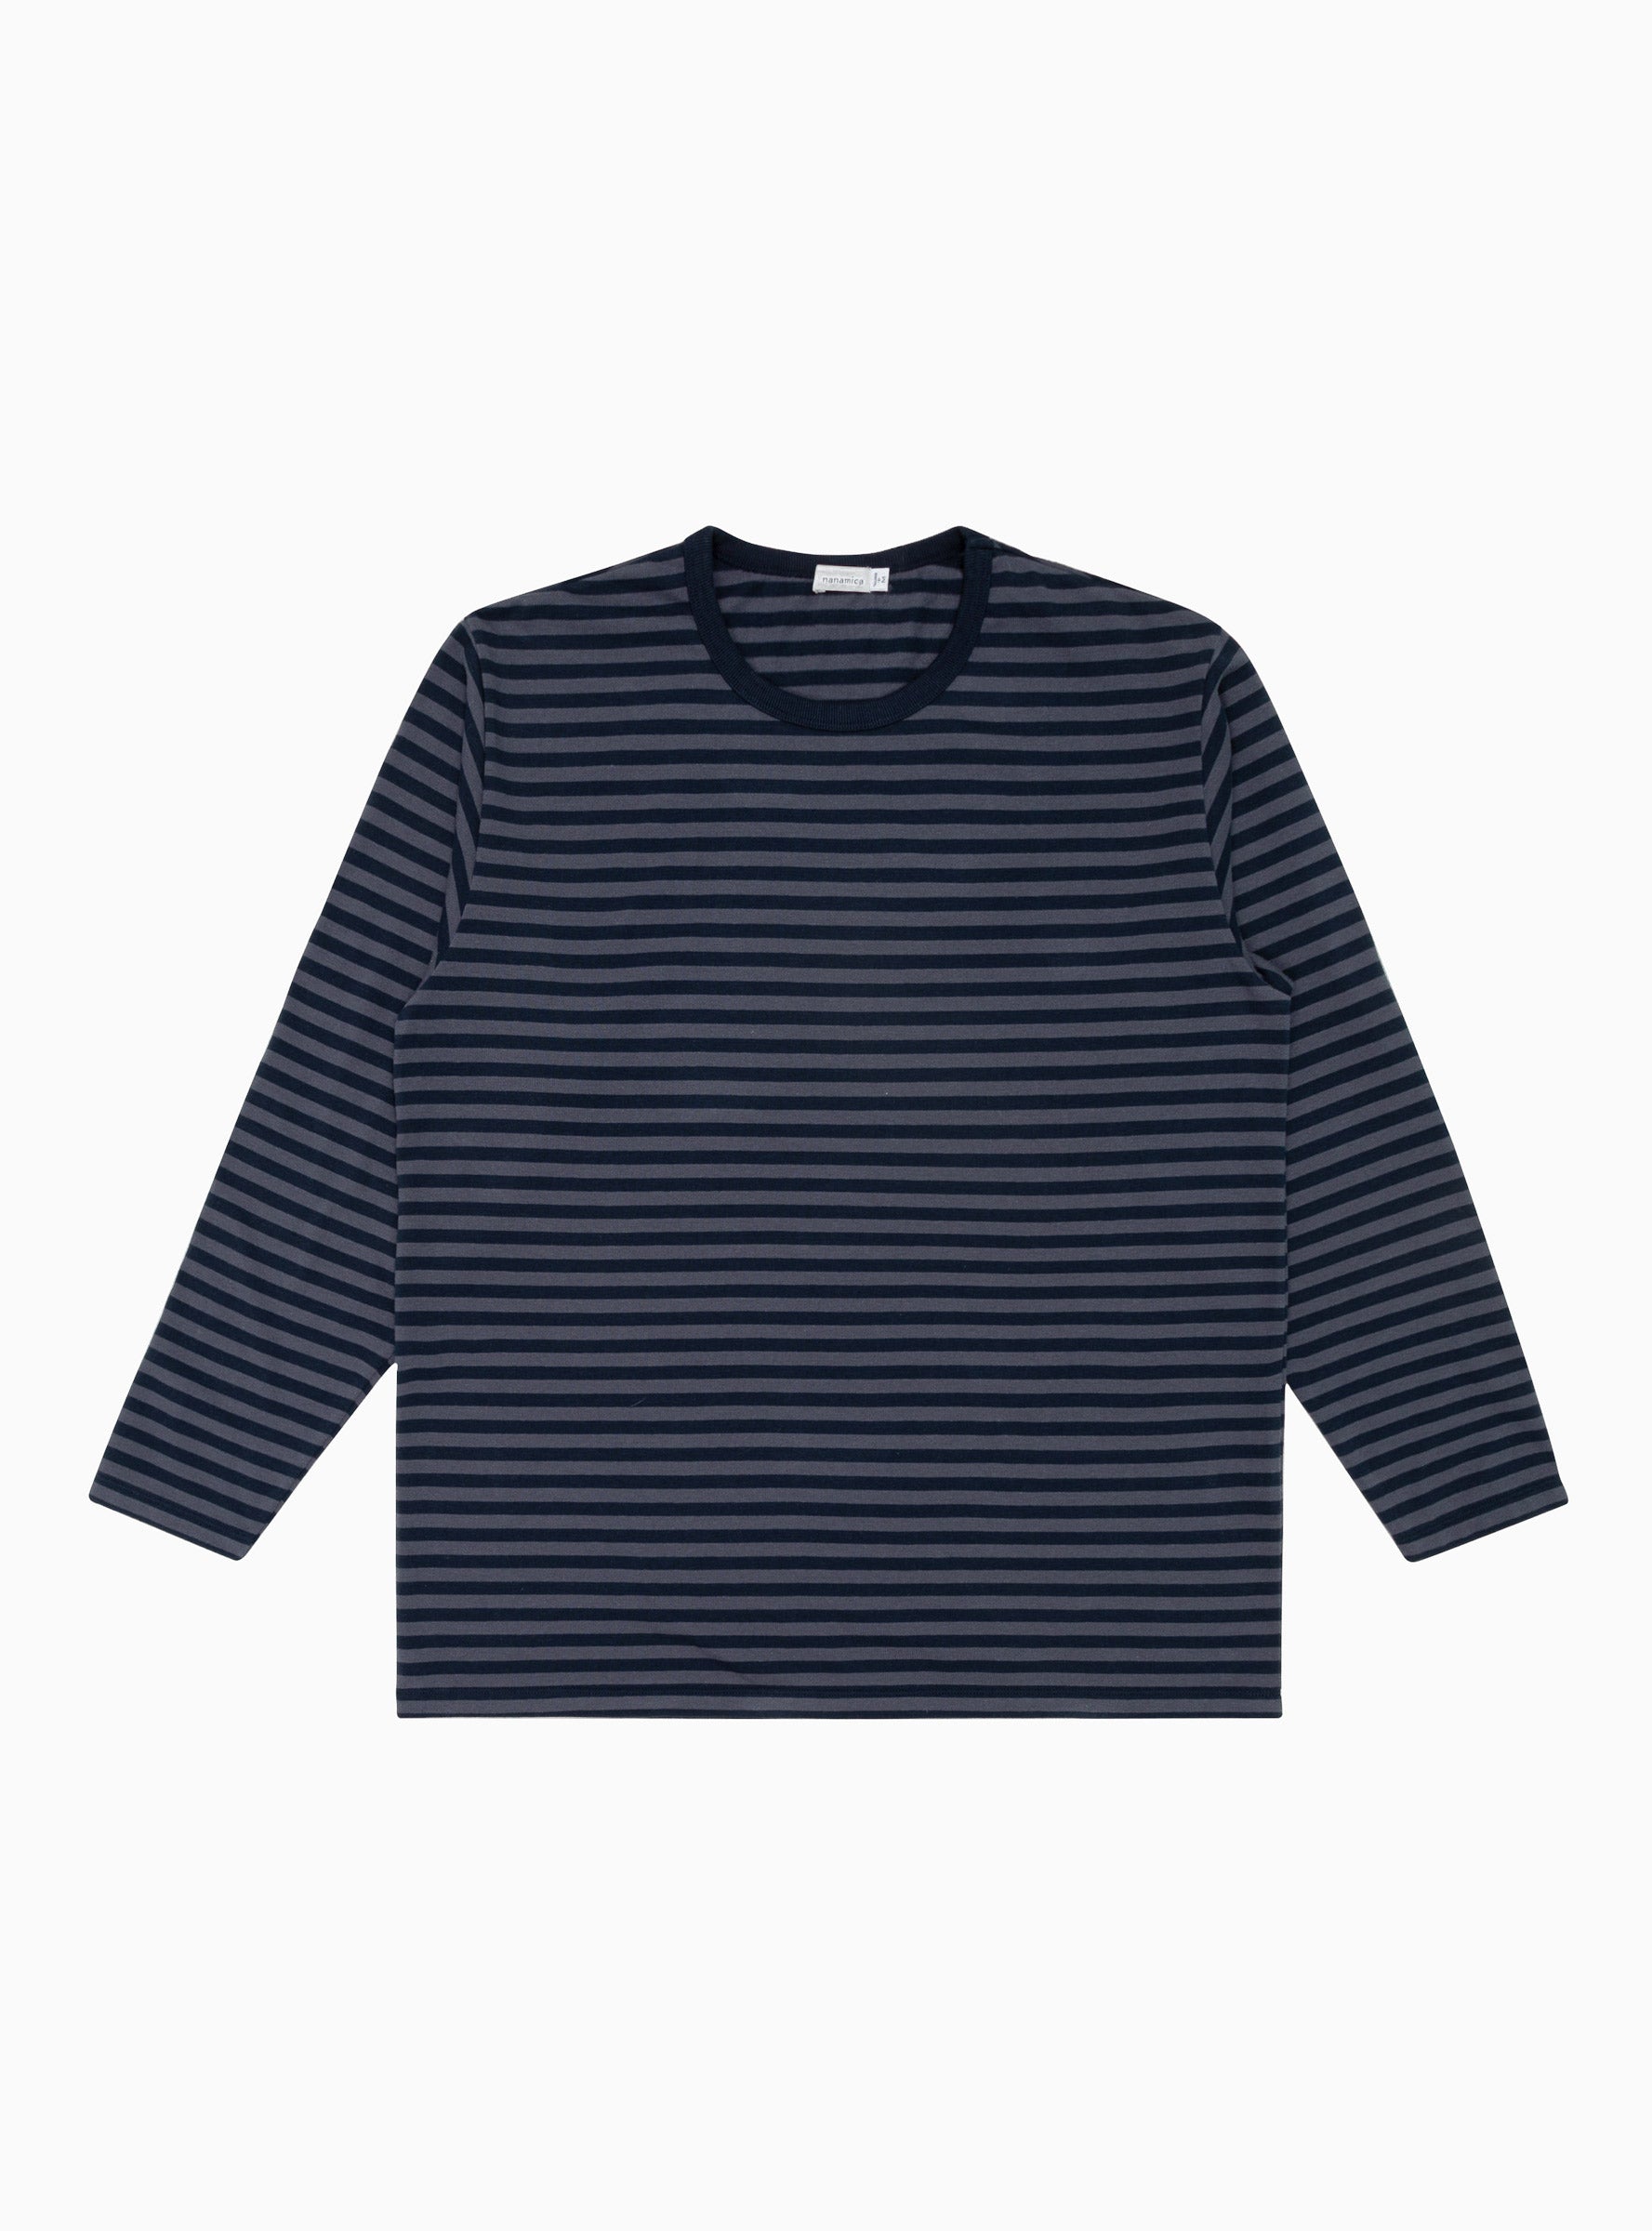 COOLMAX Stripe Long Sleeve Tee Navy & Grey by nanamica | Couverture ...